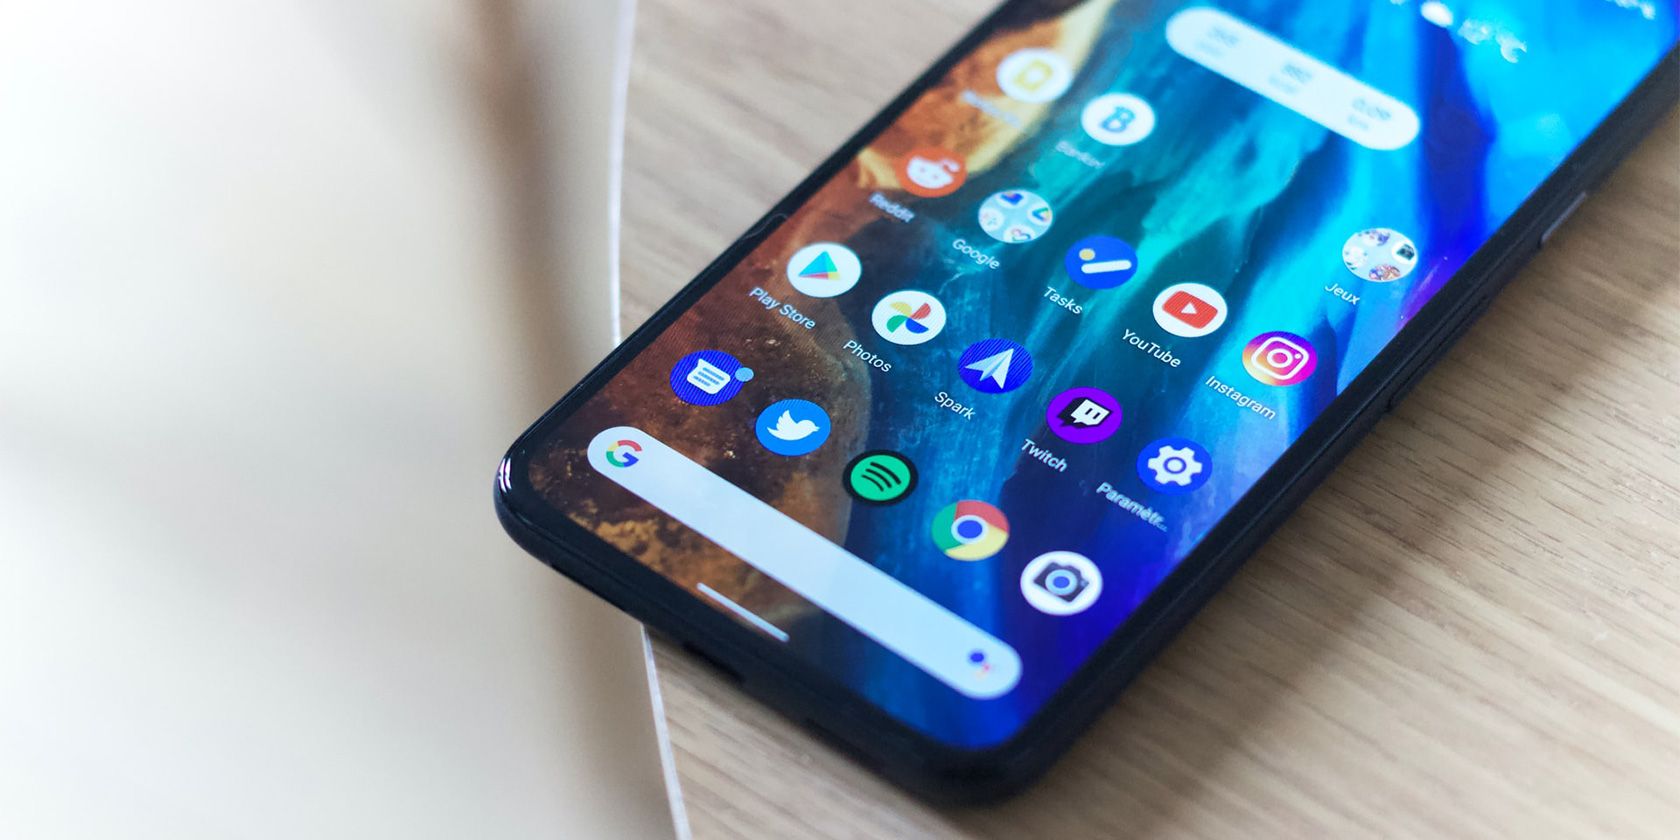 How To Make a Folder on Android